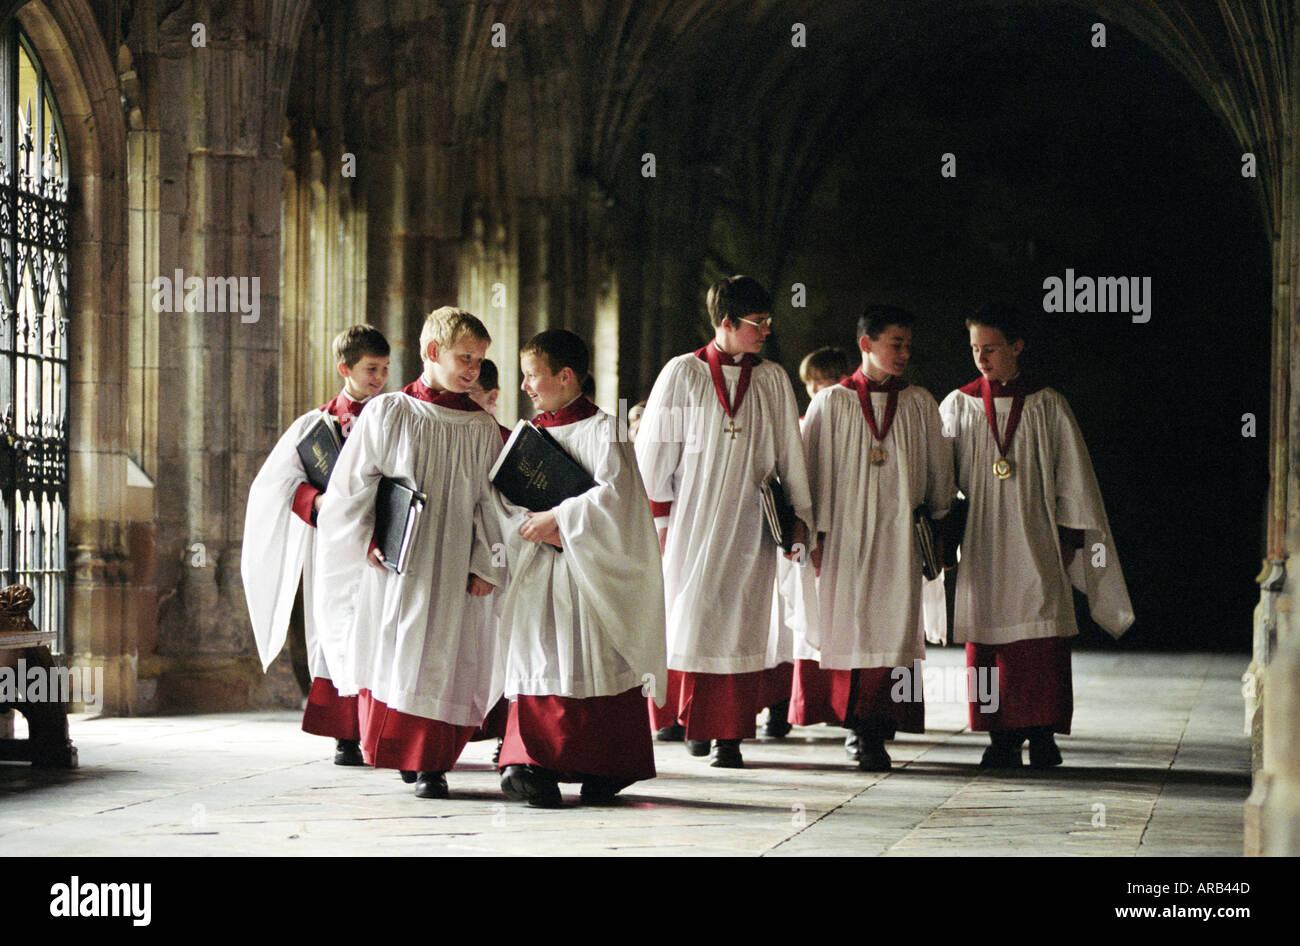 Choirboys in the cloisters in Worcester cathedral Worcestershire UK April 2001 Stock Photo